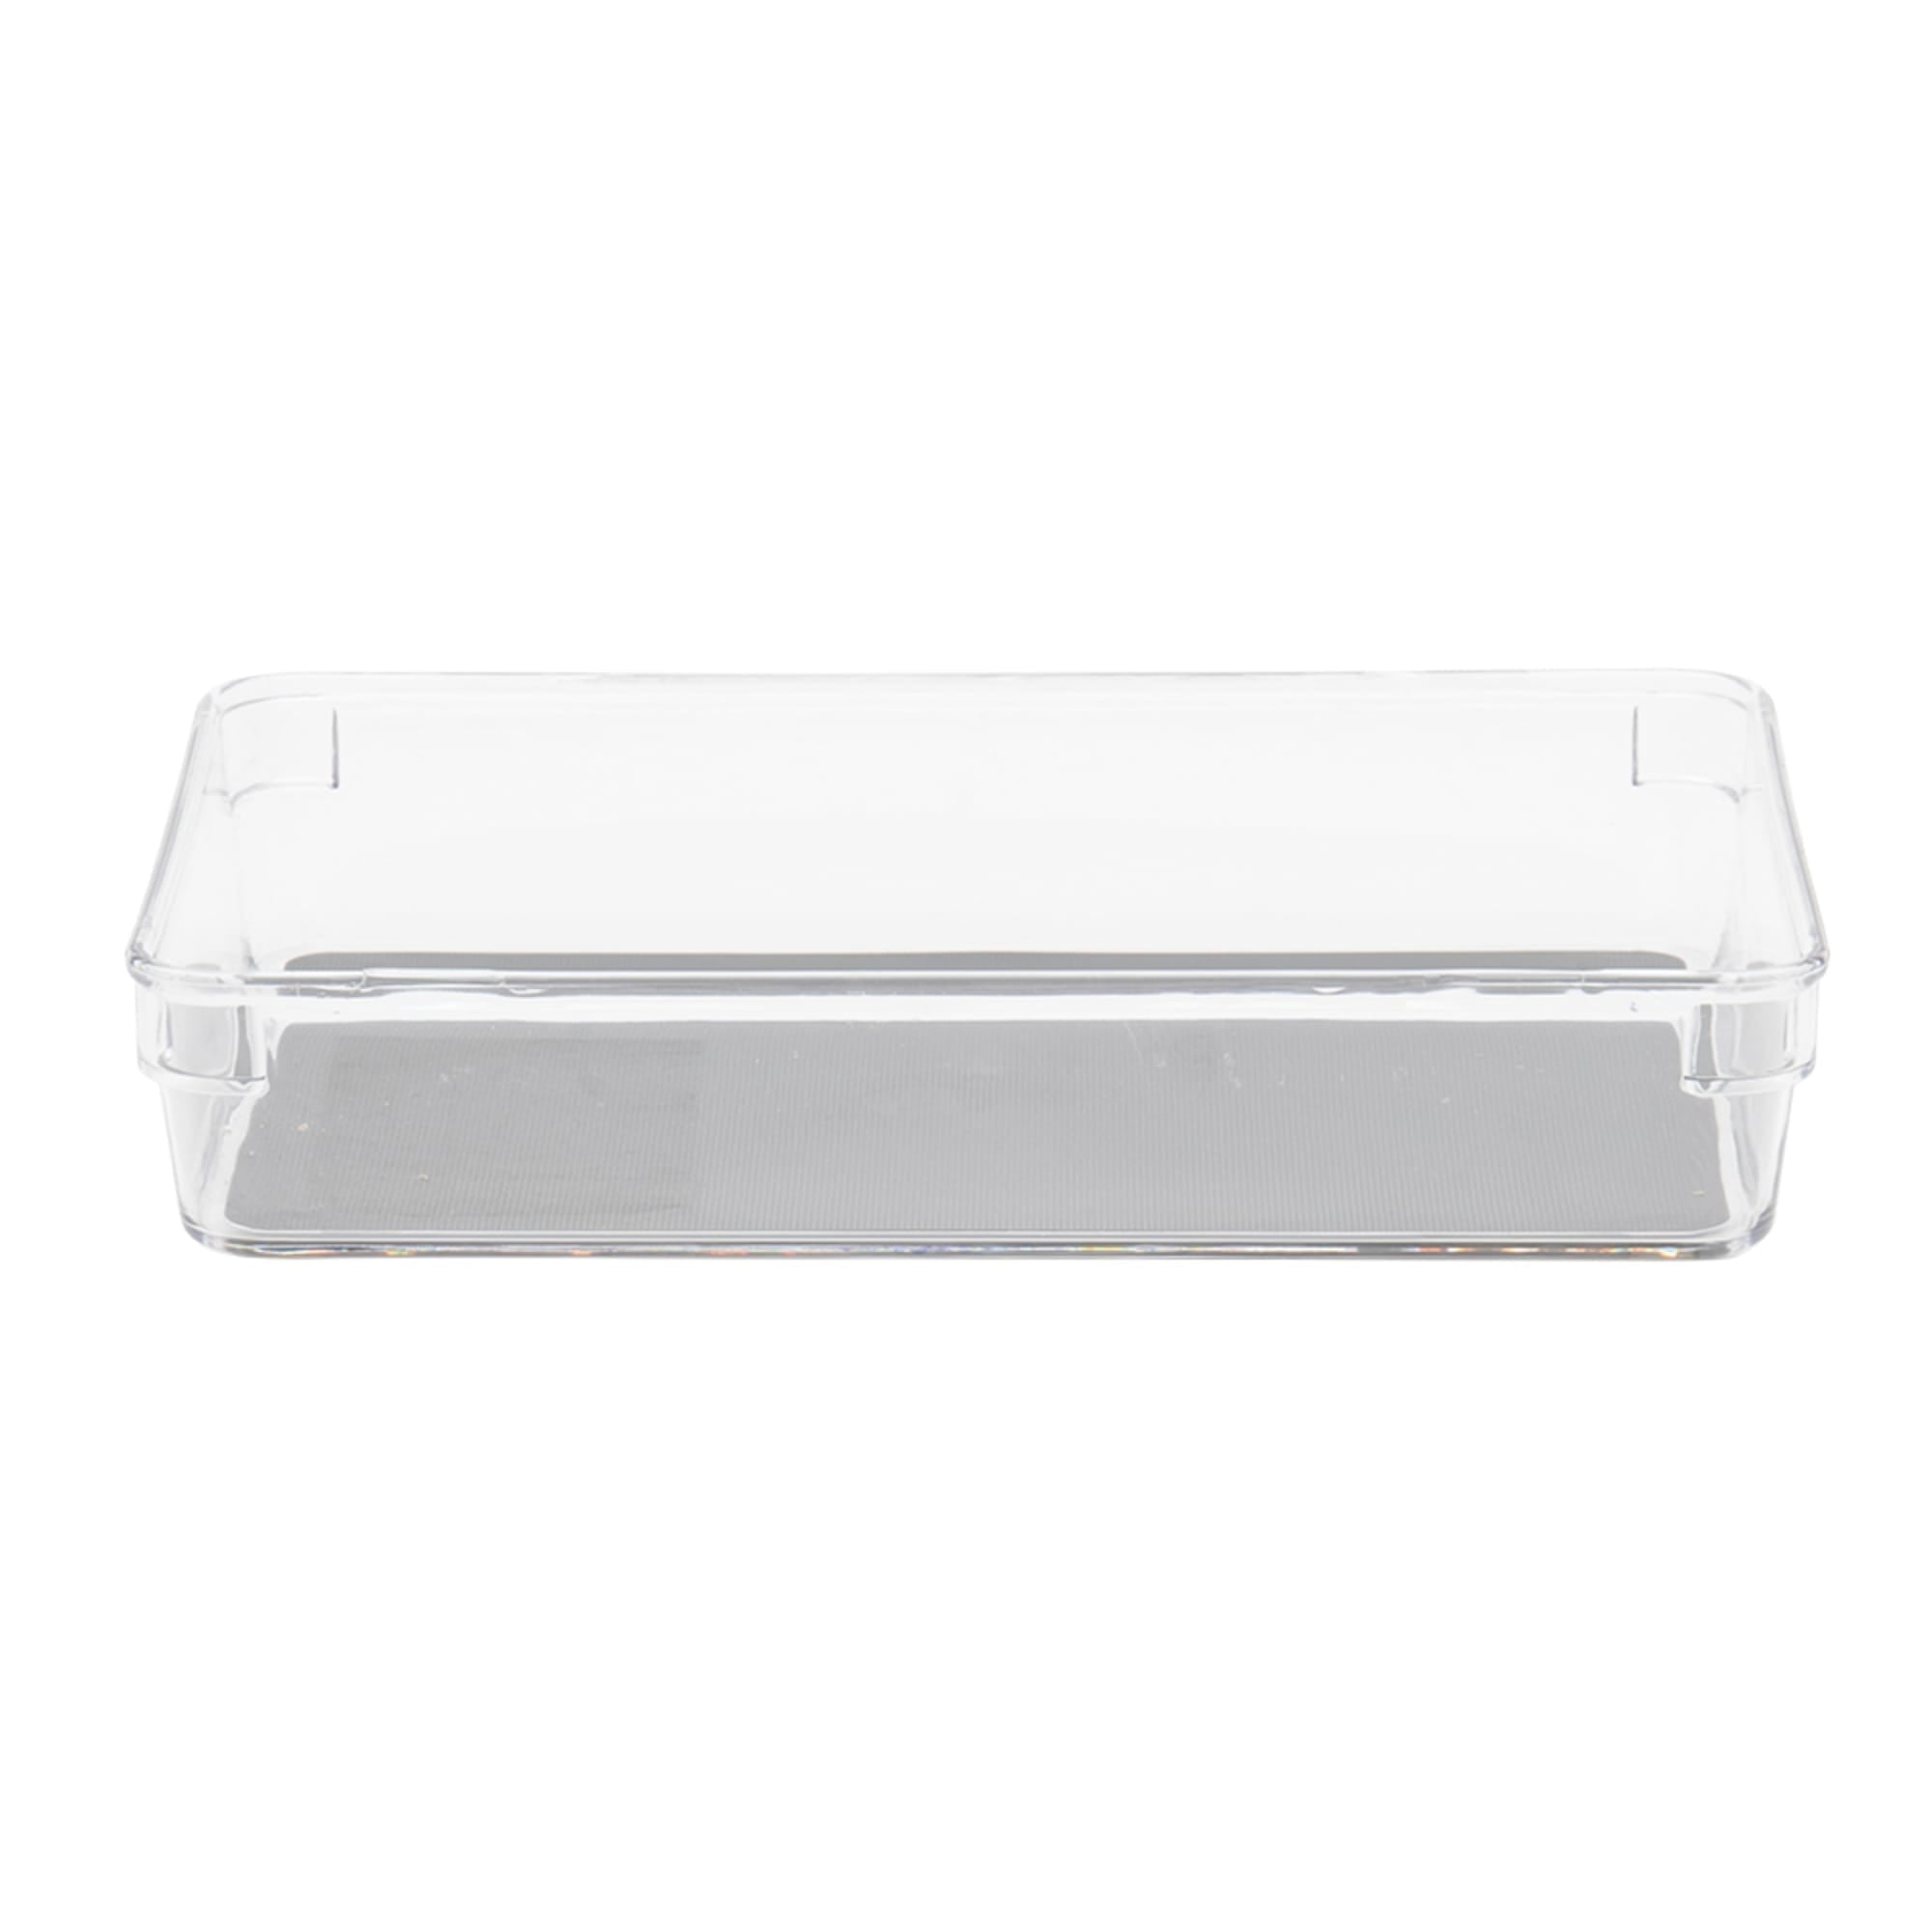 Home Basics  6" x 9" x 2" Plastic Drawer Organizer with Rubber Liner $4.00 EACH, CASE PACK OF 24